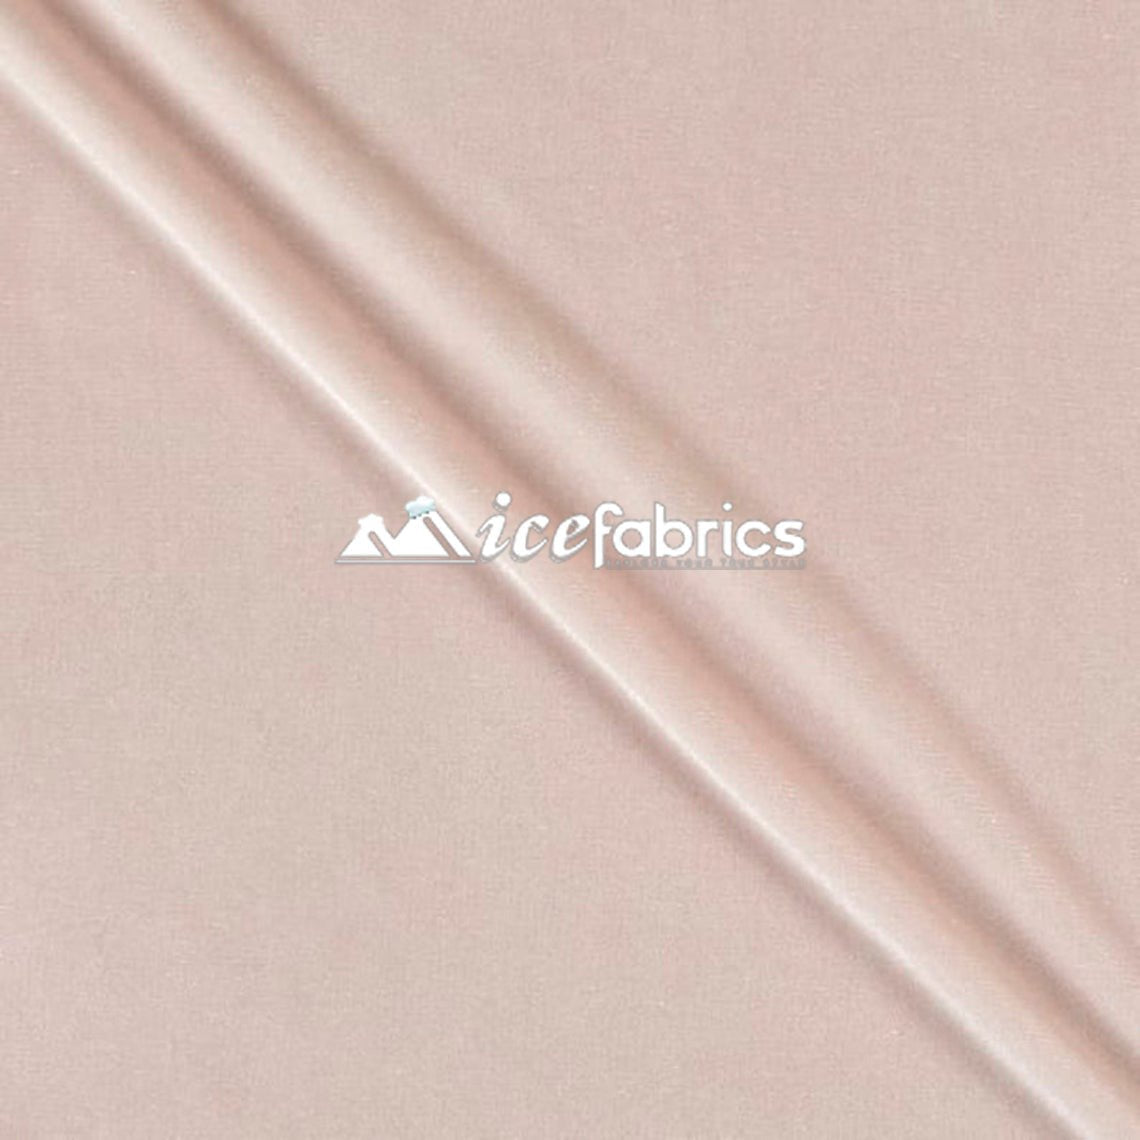 Nude Velvet Fabric By The Yard | 4 Way StretchVelvet FabricICE FABRICSICE FABRICSBy The Yard (58" Wide)Nude Velvet Fabric By The Yard | 4 Way Stretch ICE FABRICS